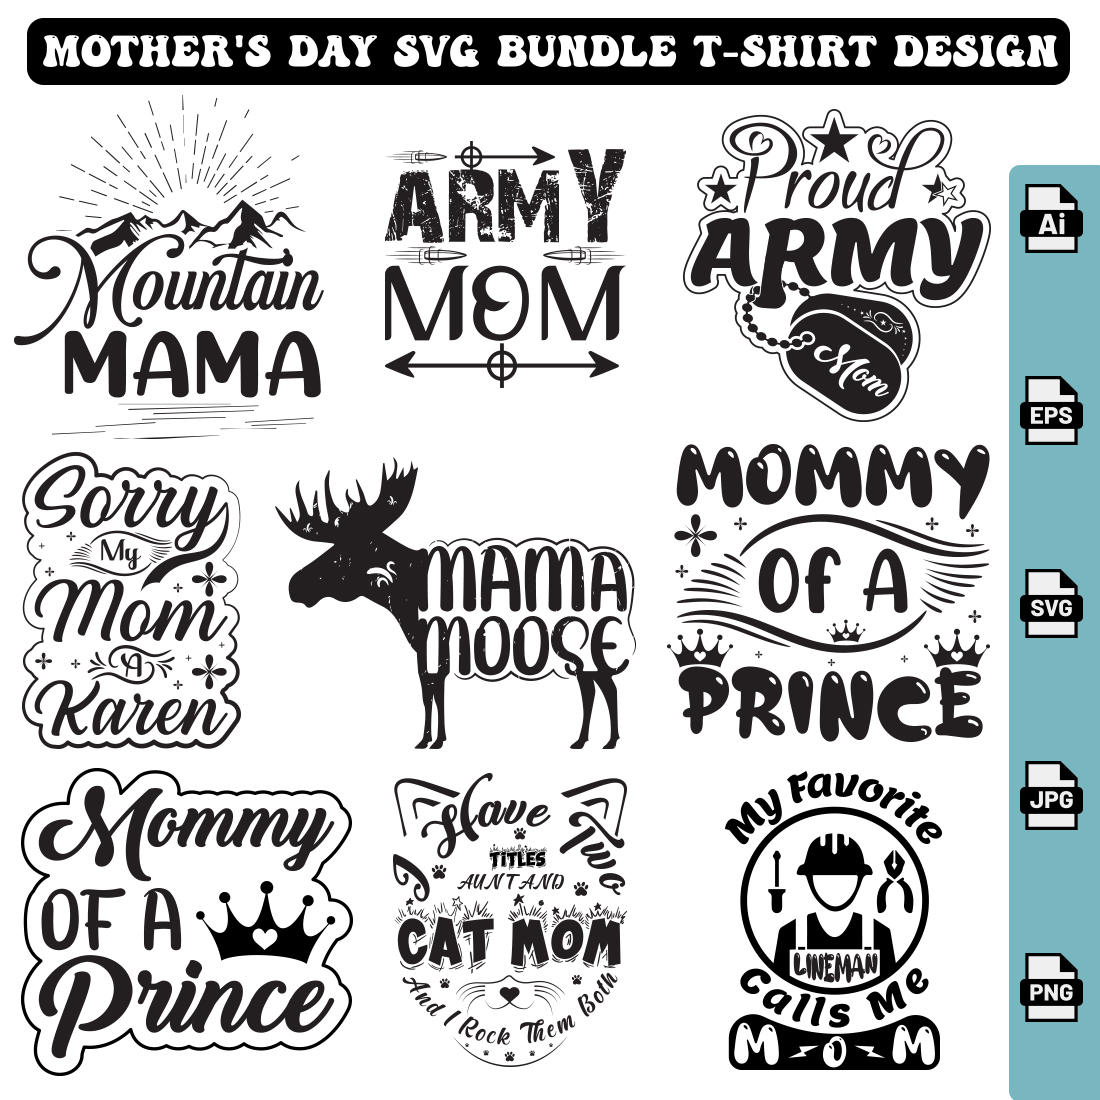 10 Vector mother's day love mom t-shirt design SVG bunles, inspiring motivation quote with text mother day tshirt, mom typography t-shirt bundles preview image.